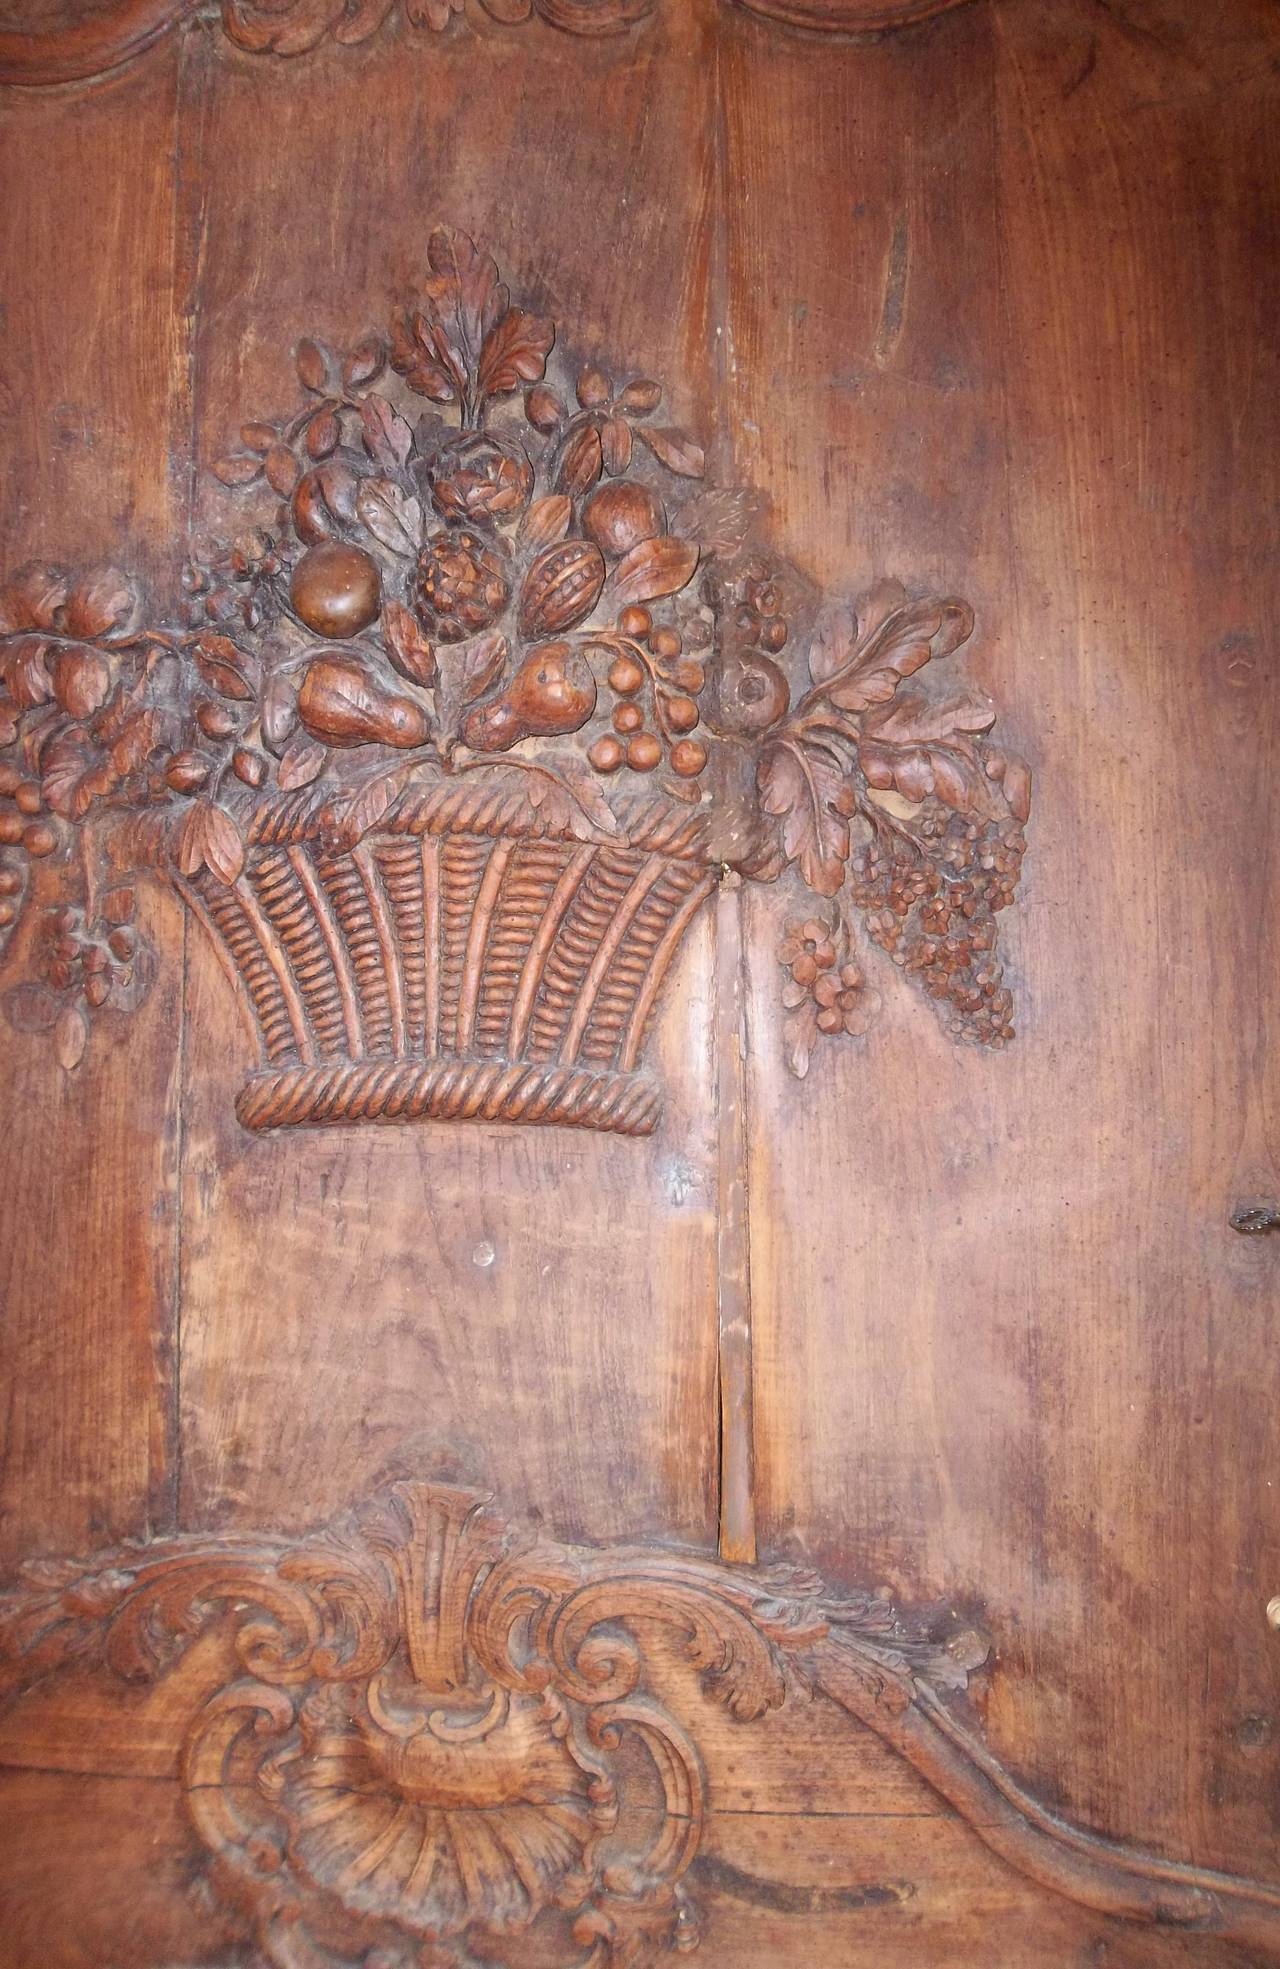 With a distinct central bow . The outer carving of typical Rococo floral and rocaille shell motifs. The center with a basket of fruit and flowers.  Probably a chimney breast . Faded and dry lacking a finish . When oiled or wet , a rich walnut color 